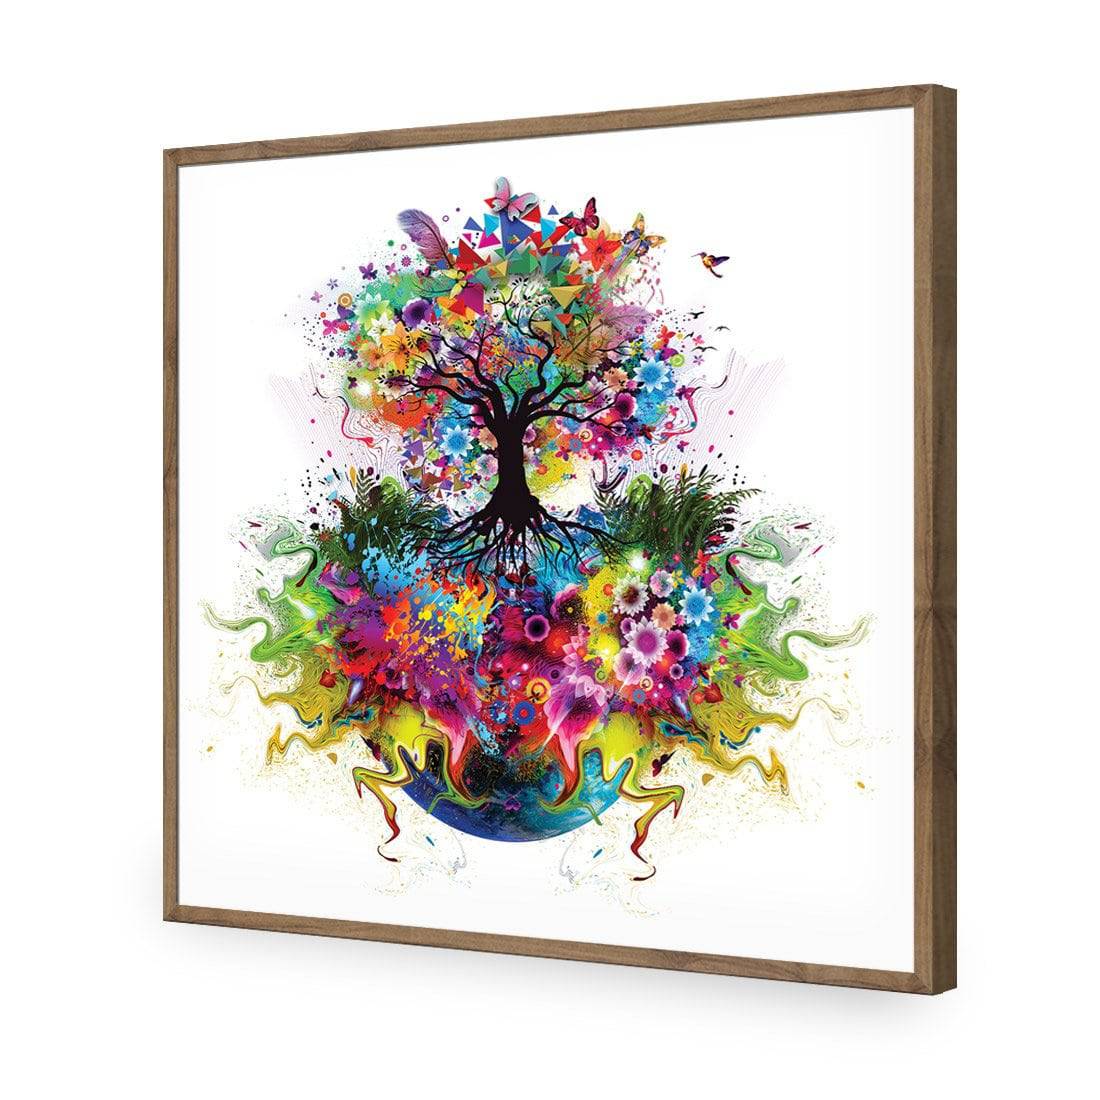 Flower Power, Square-Acrylic-Wall Art Design-Without Border-Acrylic - Natural Frame-37x37cm-Wall Art Designs